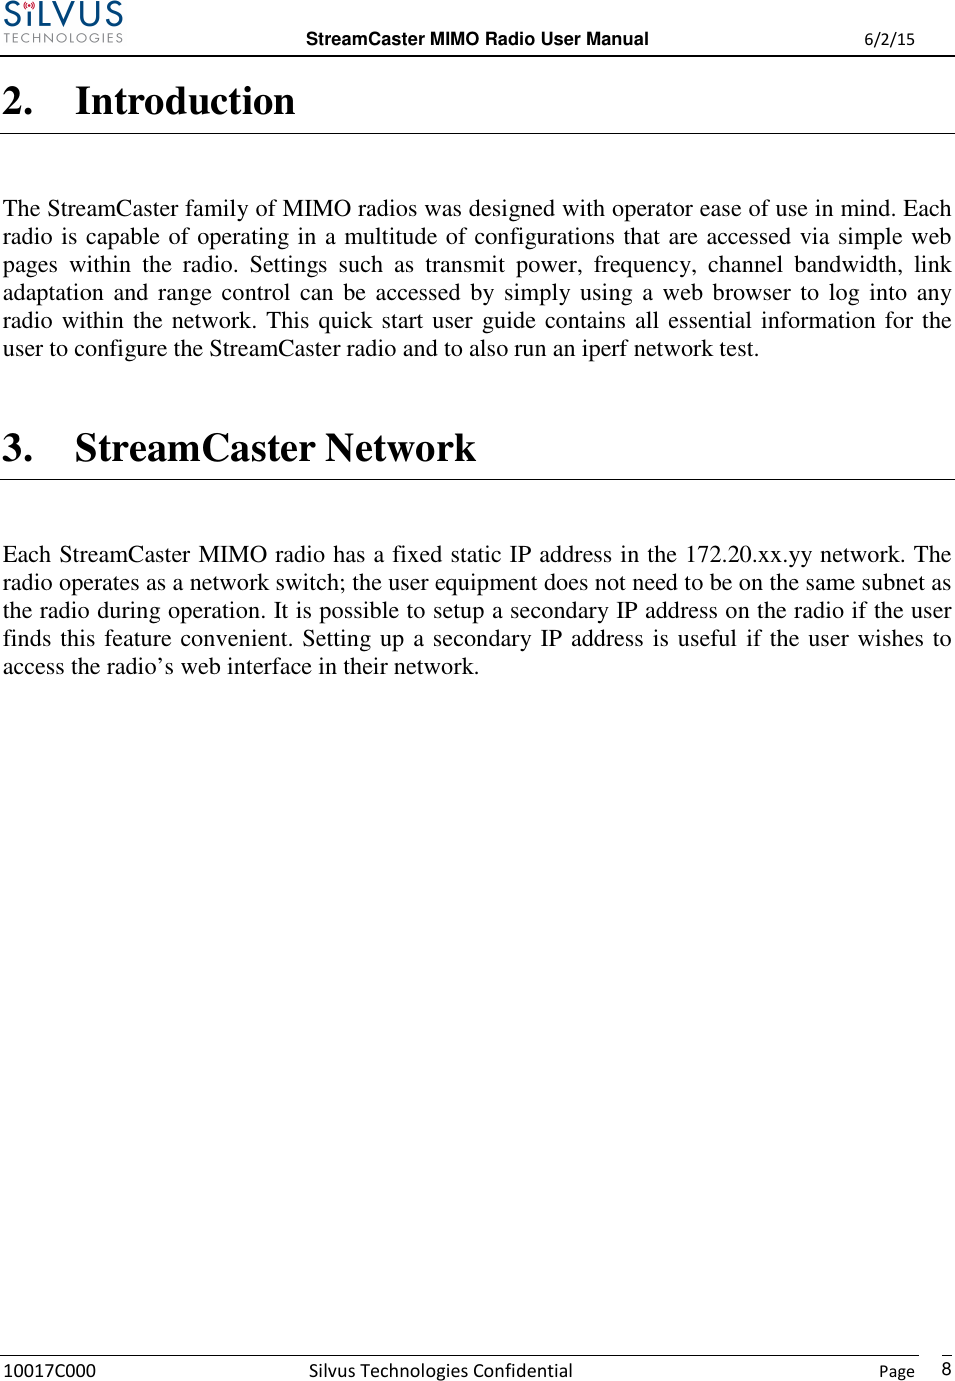  StreamCaster MIMO Radio User Manual  6/2/15 10017C000 Silvus Technologies Confidential    Page   82. Introduction The StreamCaster family of MIMO radios was designed with operator ease of use in mind. Each radio is capable of operating in a multitude of configurations that are accessed via simple web pages  within  the  radio.  Settings  such  as  transmit  power,  frequency,  channel  bandwidth,  link adaptation and range control can be accessed  by  simply using a web browser to  log  into  any radio within the network. This quick start user guide contains all essential information for the user to configure the StreamCaster radio and to also run an iperf network test.  3. StreamCaster Network Each StreamCaster MIMO radio has a fixed static IP address in the 172.20.xx.yy network. The radio operates as a network switch; the user equipment does not need to be on the same subnet as the radio during operation. It is possible to setup a secondary IP address on the radio if the user finds this feature convenient. Setting up a secondary IP address is useful if the user wishes to access the radio’s web interface in their network.          